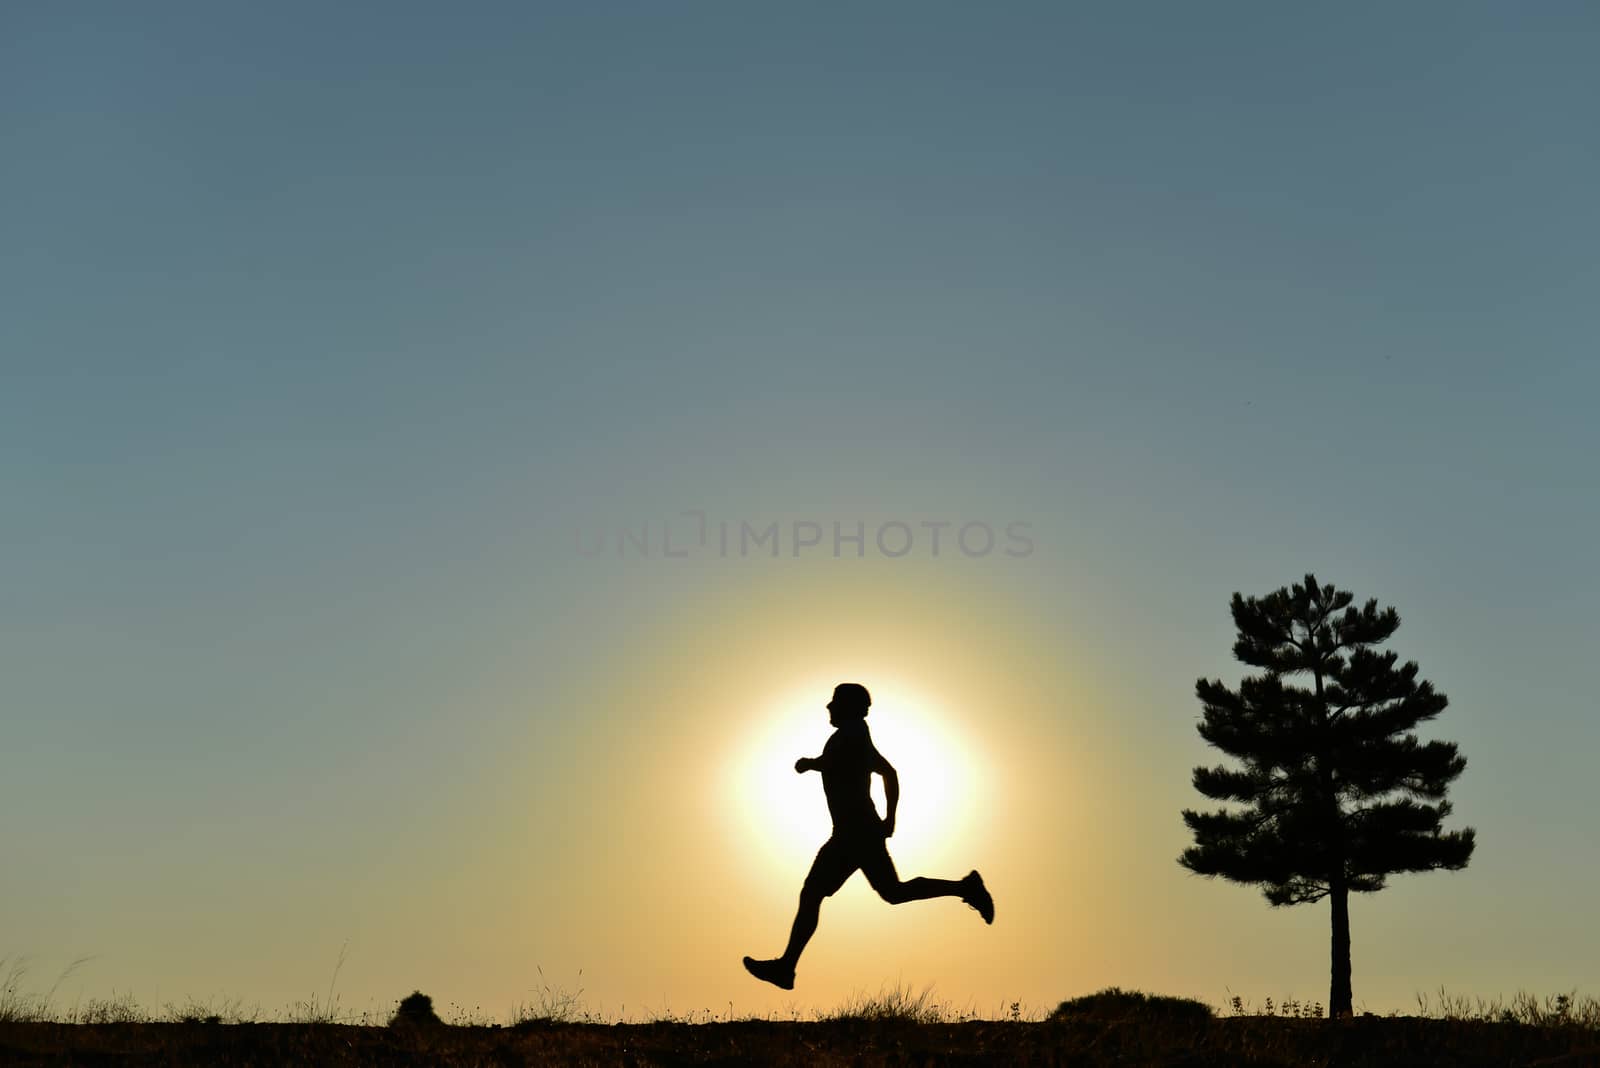 run in the morning for Healthy Living by crazymedia007